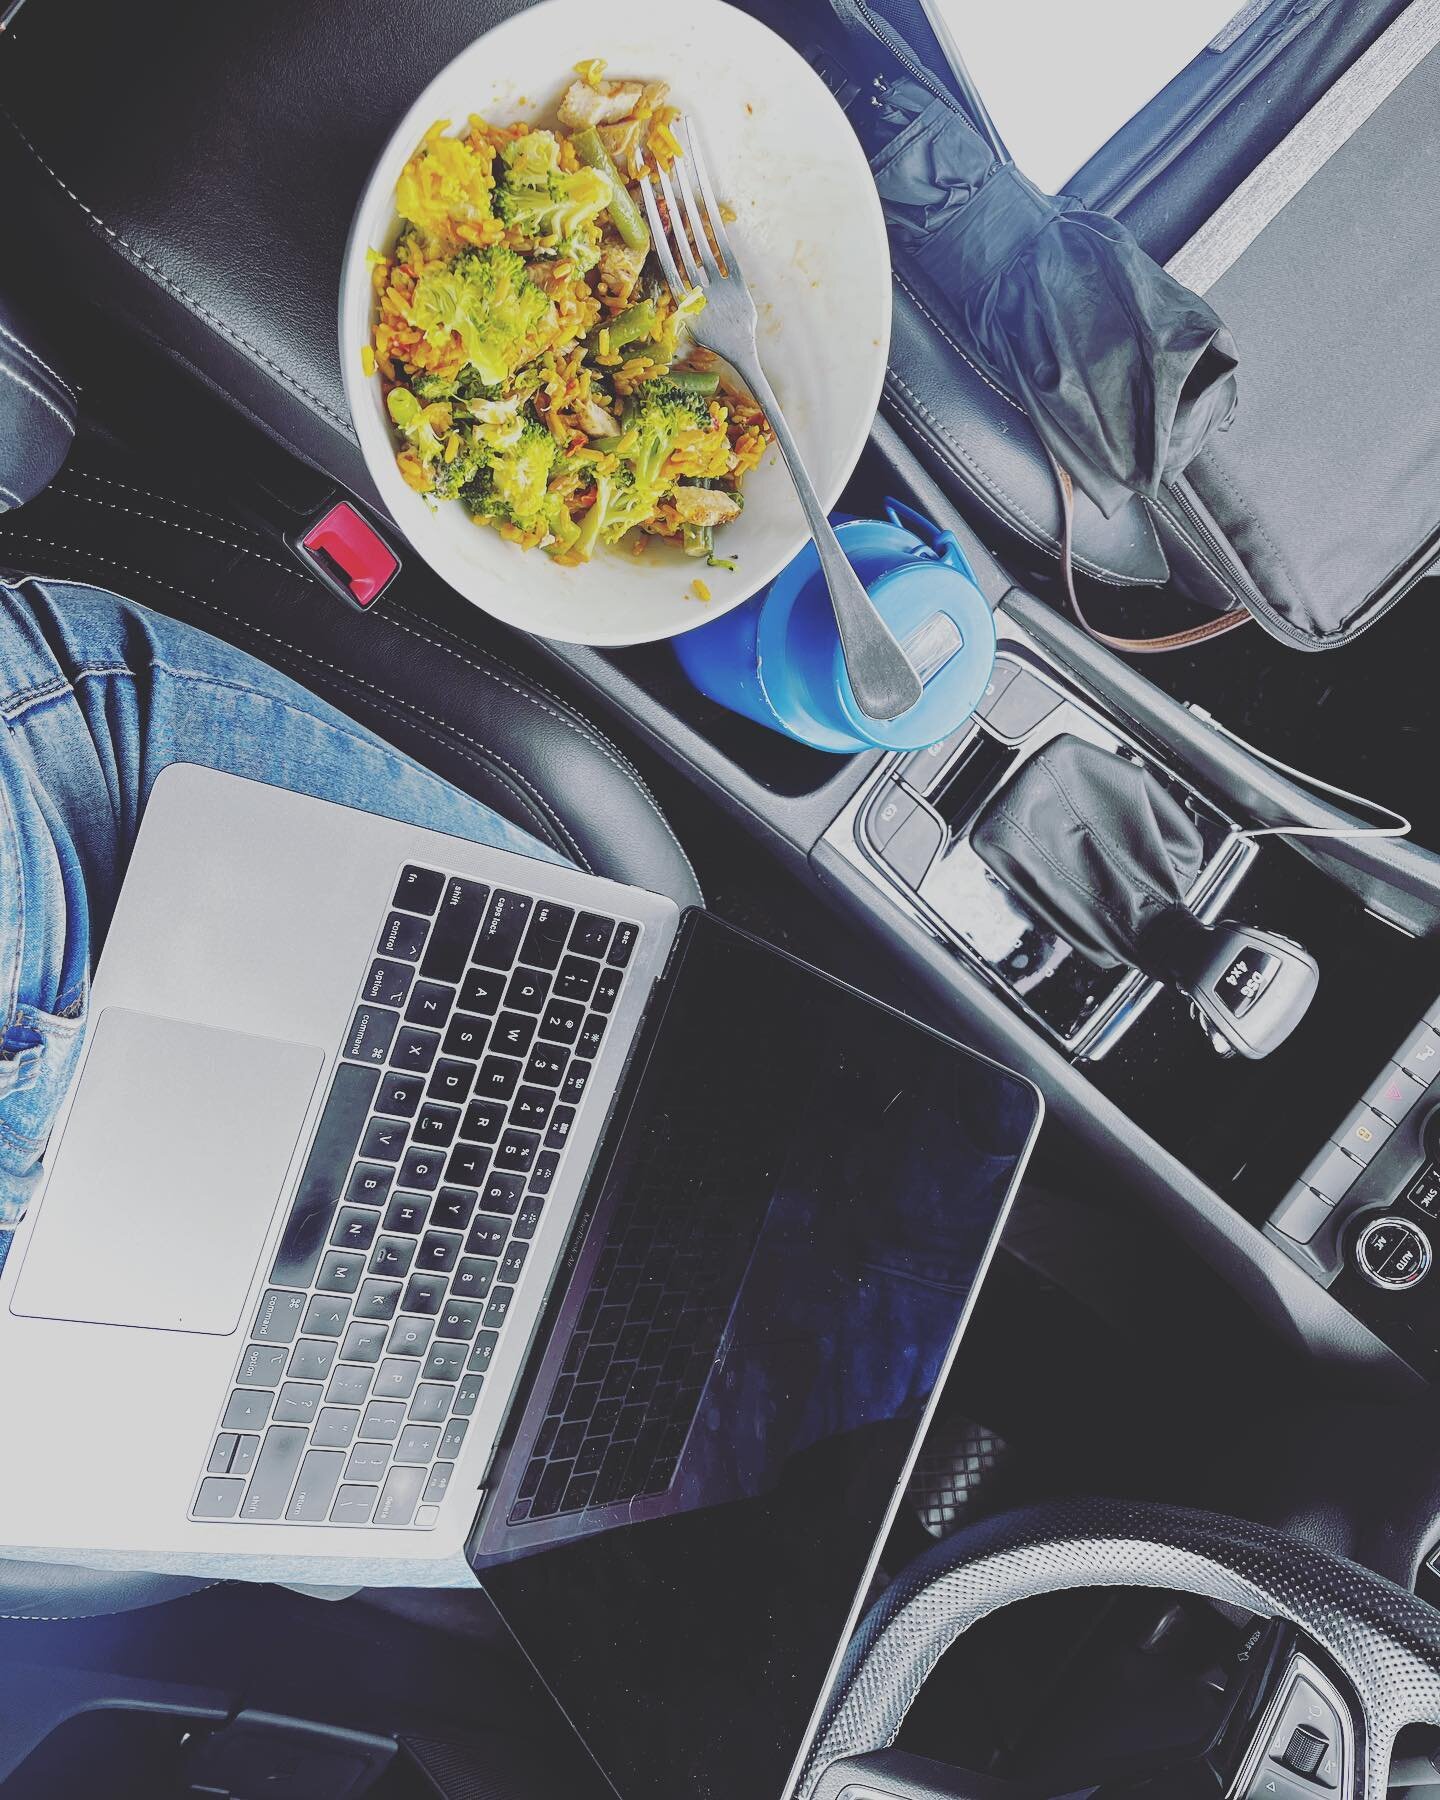 Some serious multi-tasking today! Editing an ms in the car while waiting at school pick up and eating late lunch! #mumlife 🤣

#mumwriter #mumlife #momlife #momwriter #momwriters #author #authorsofinstagram #writer #writersofinstagram #writerlife #wr